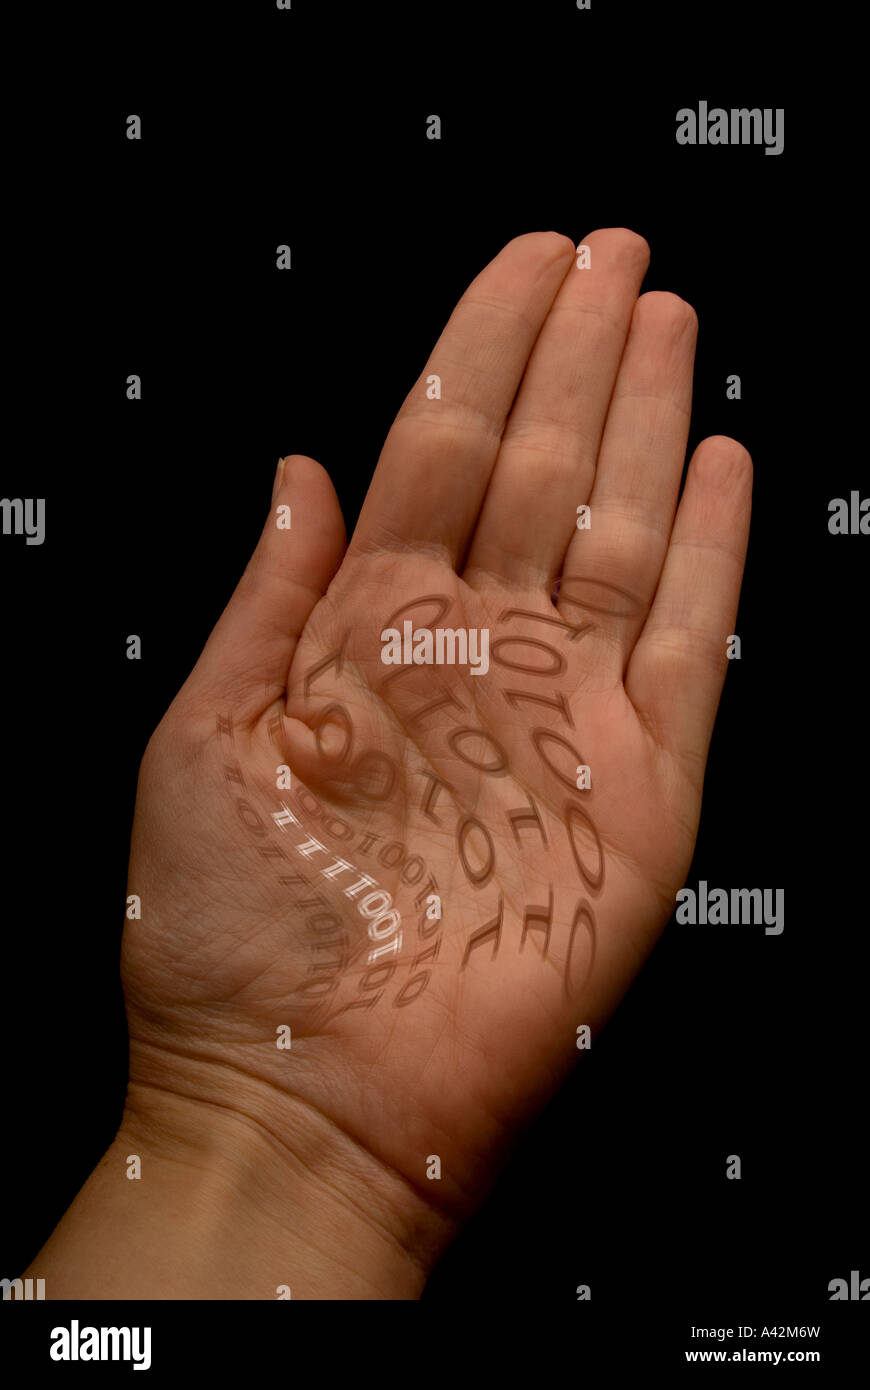 Human hand with Binary Code in palm Stock Photo